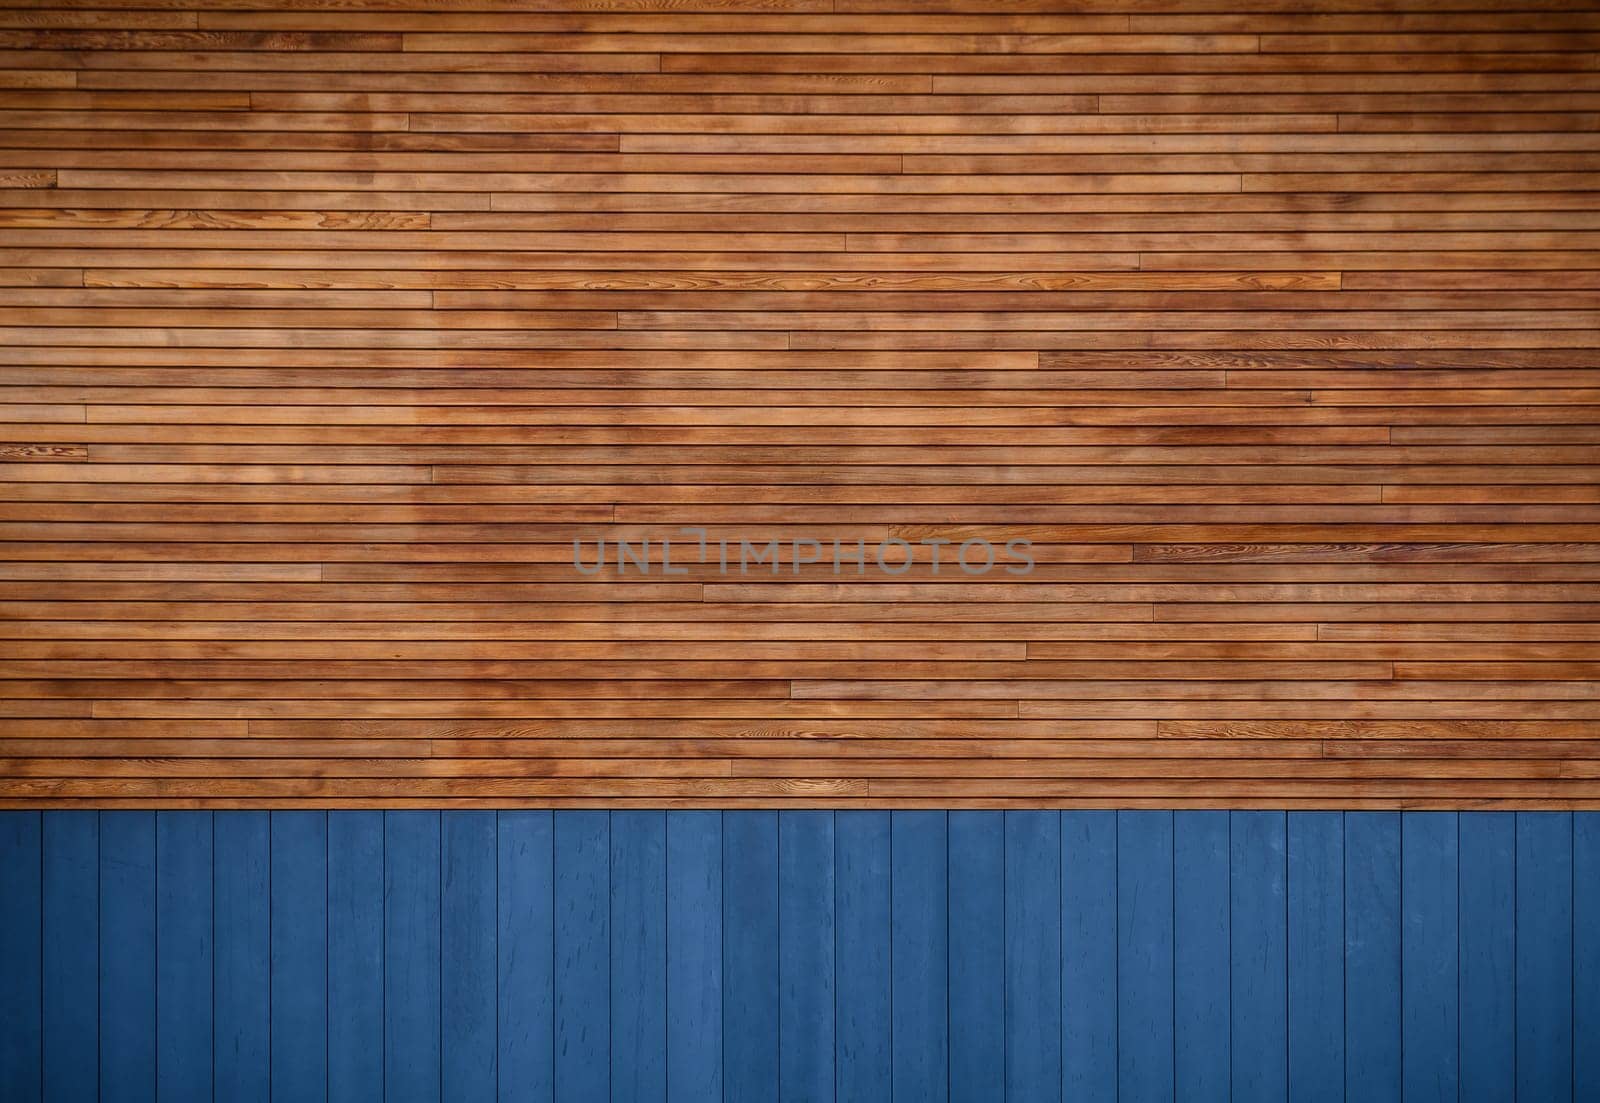 blue metal siding and wooden boards on the facade as a background 2 by Mixa74